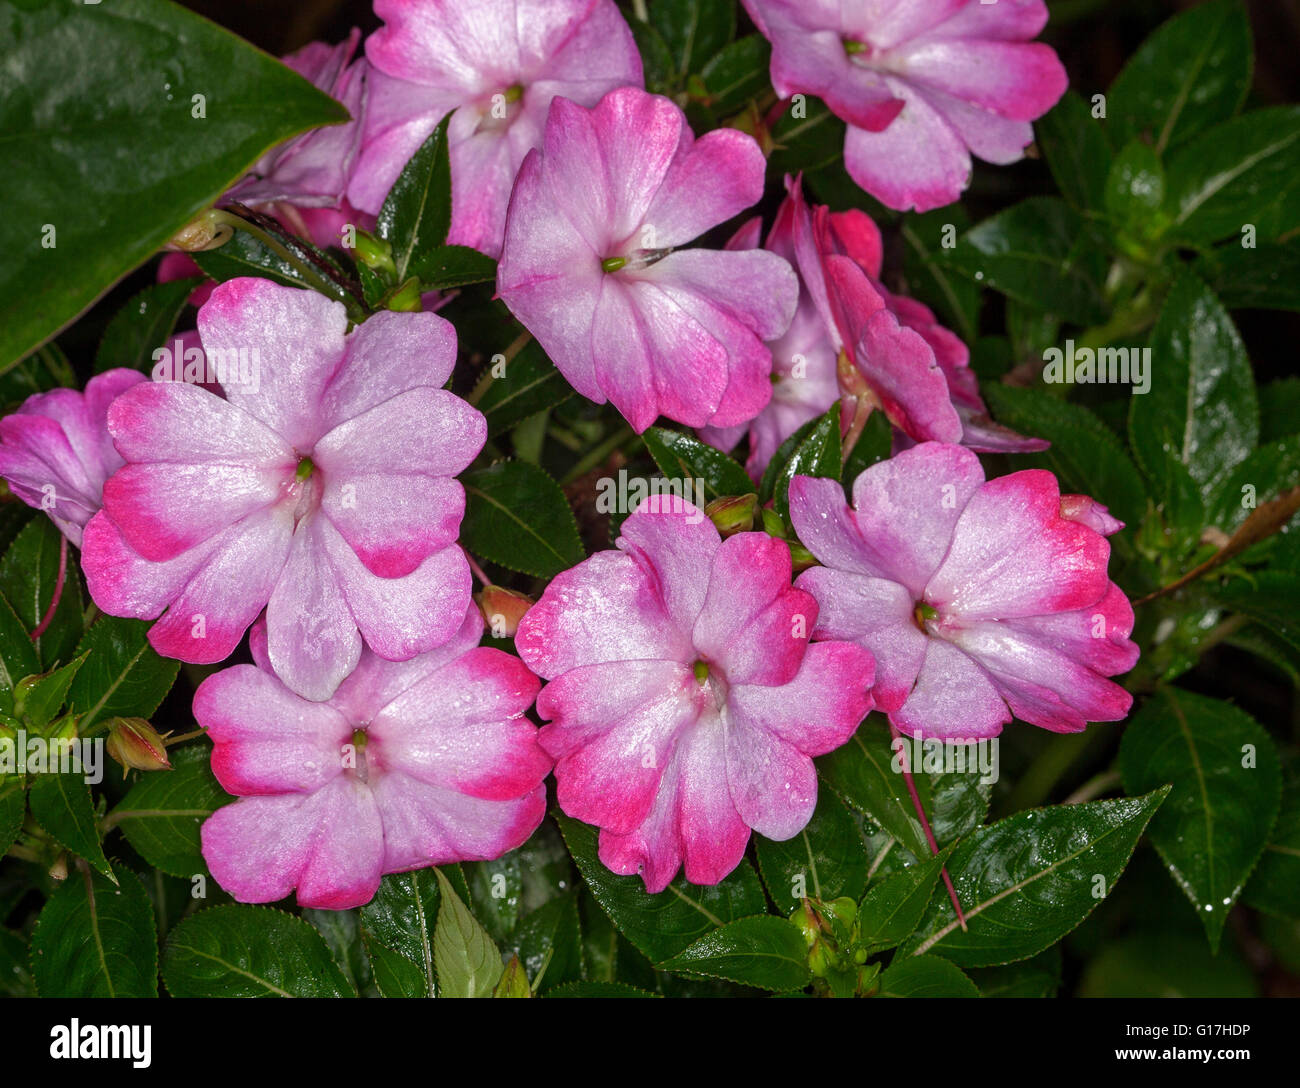 Cluster of colourful pink and white flowers and dark green leaves of New Guinea impatiens 'Harmony Radiance' Stock Photo